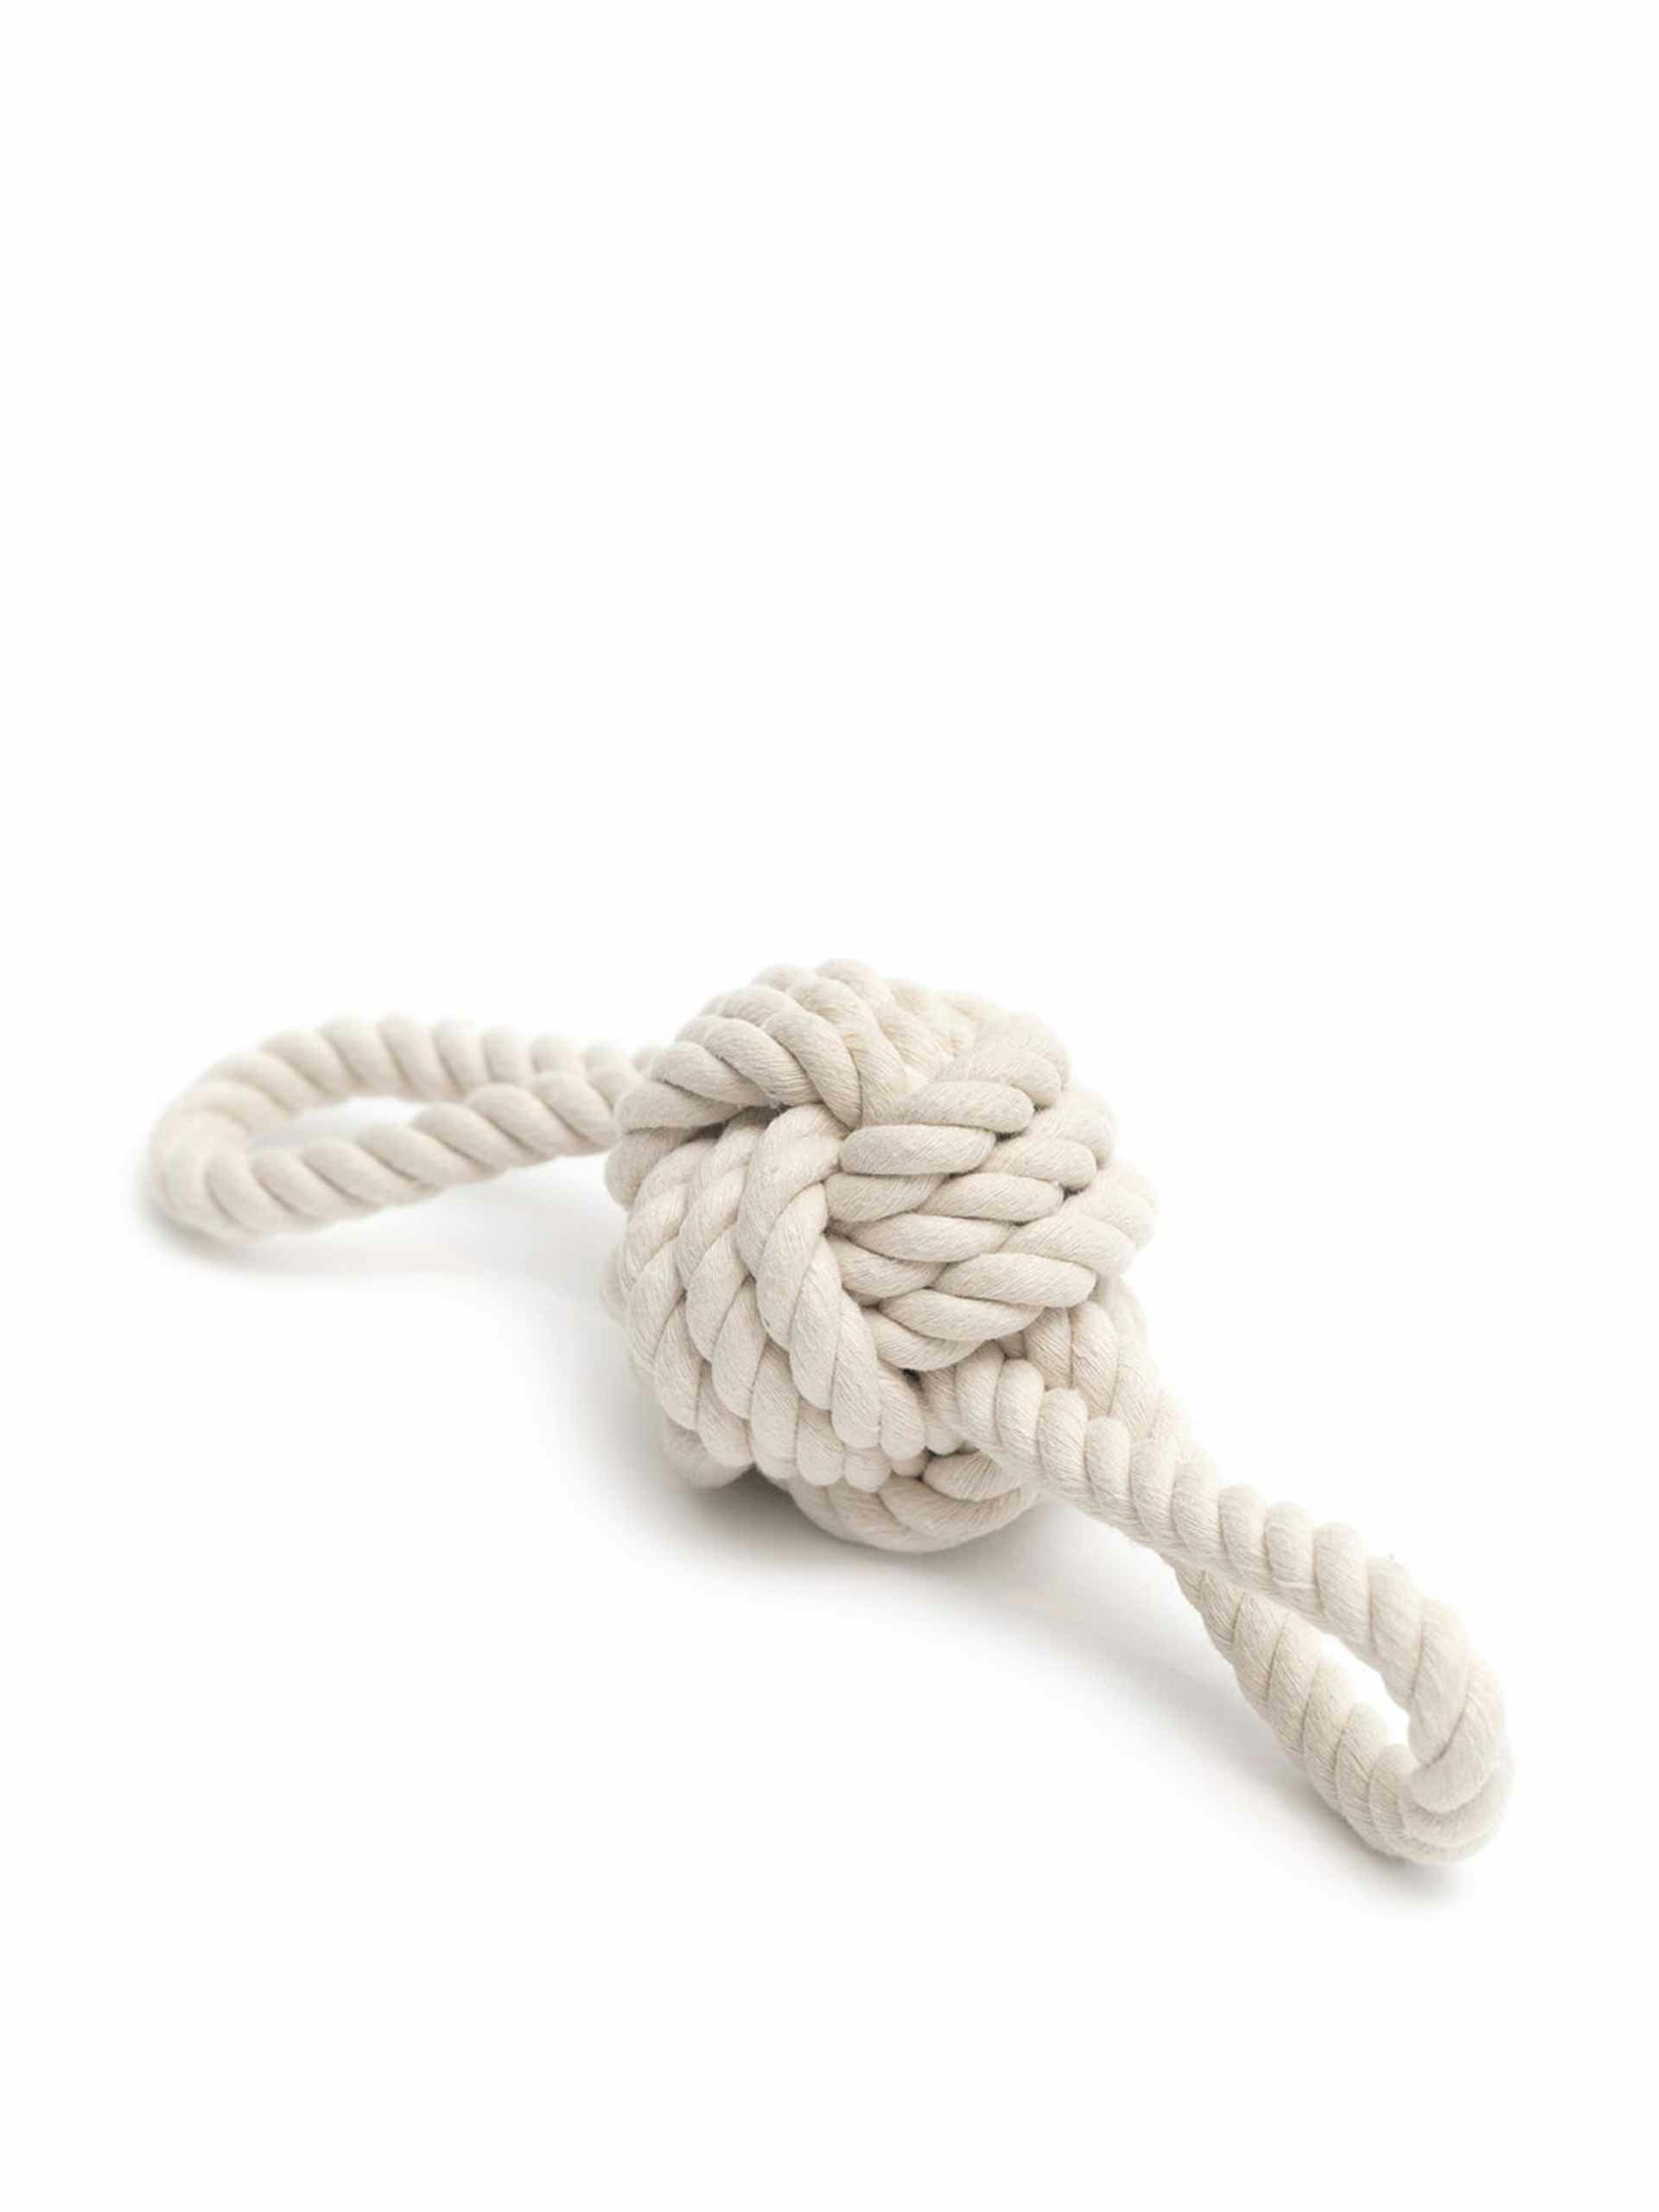 Small rope tug dog toy